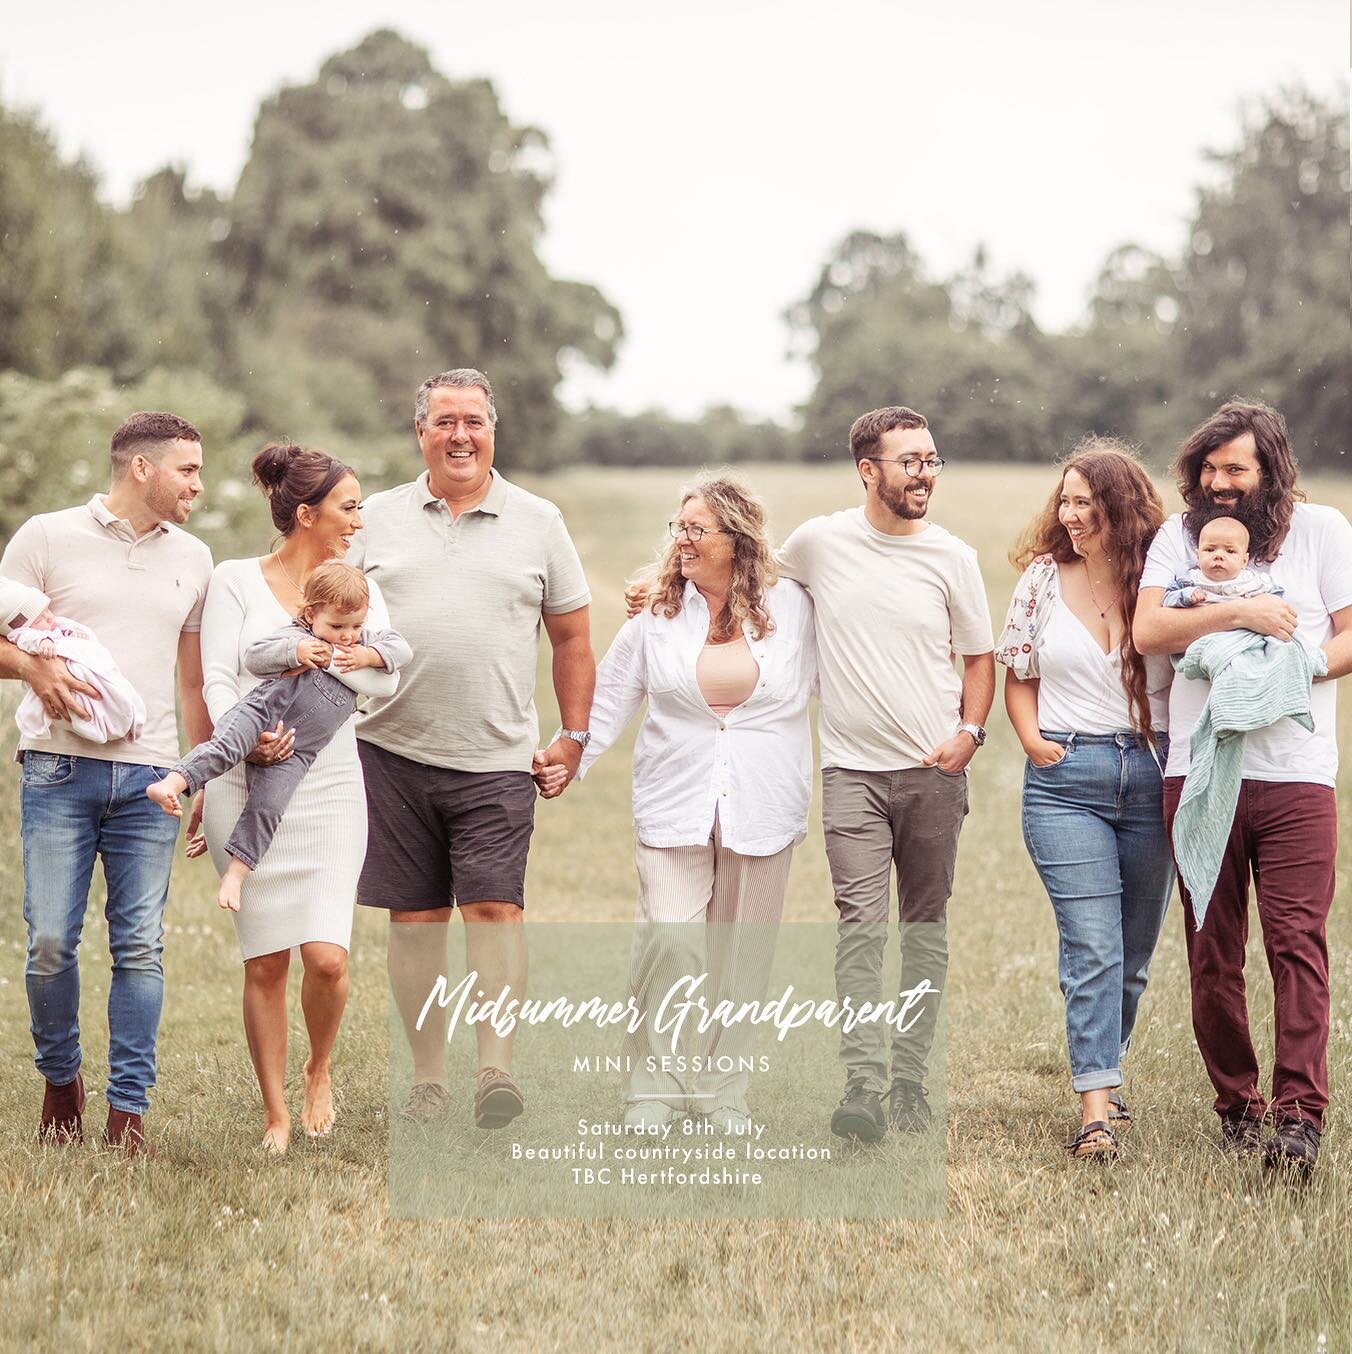 Midsummer Grandparent | Mini Sessions | Saturday 8th July 2023

Super fun, loving and relaxed mini sessions for the extended family! 

Booking now, scroll for full details | sessions limited | link in bio

#summer #familyminisession #countryside #min